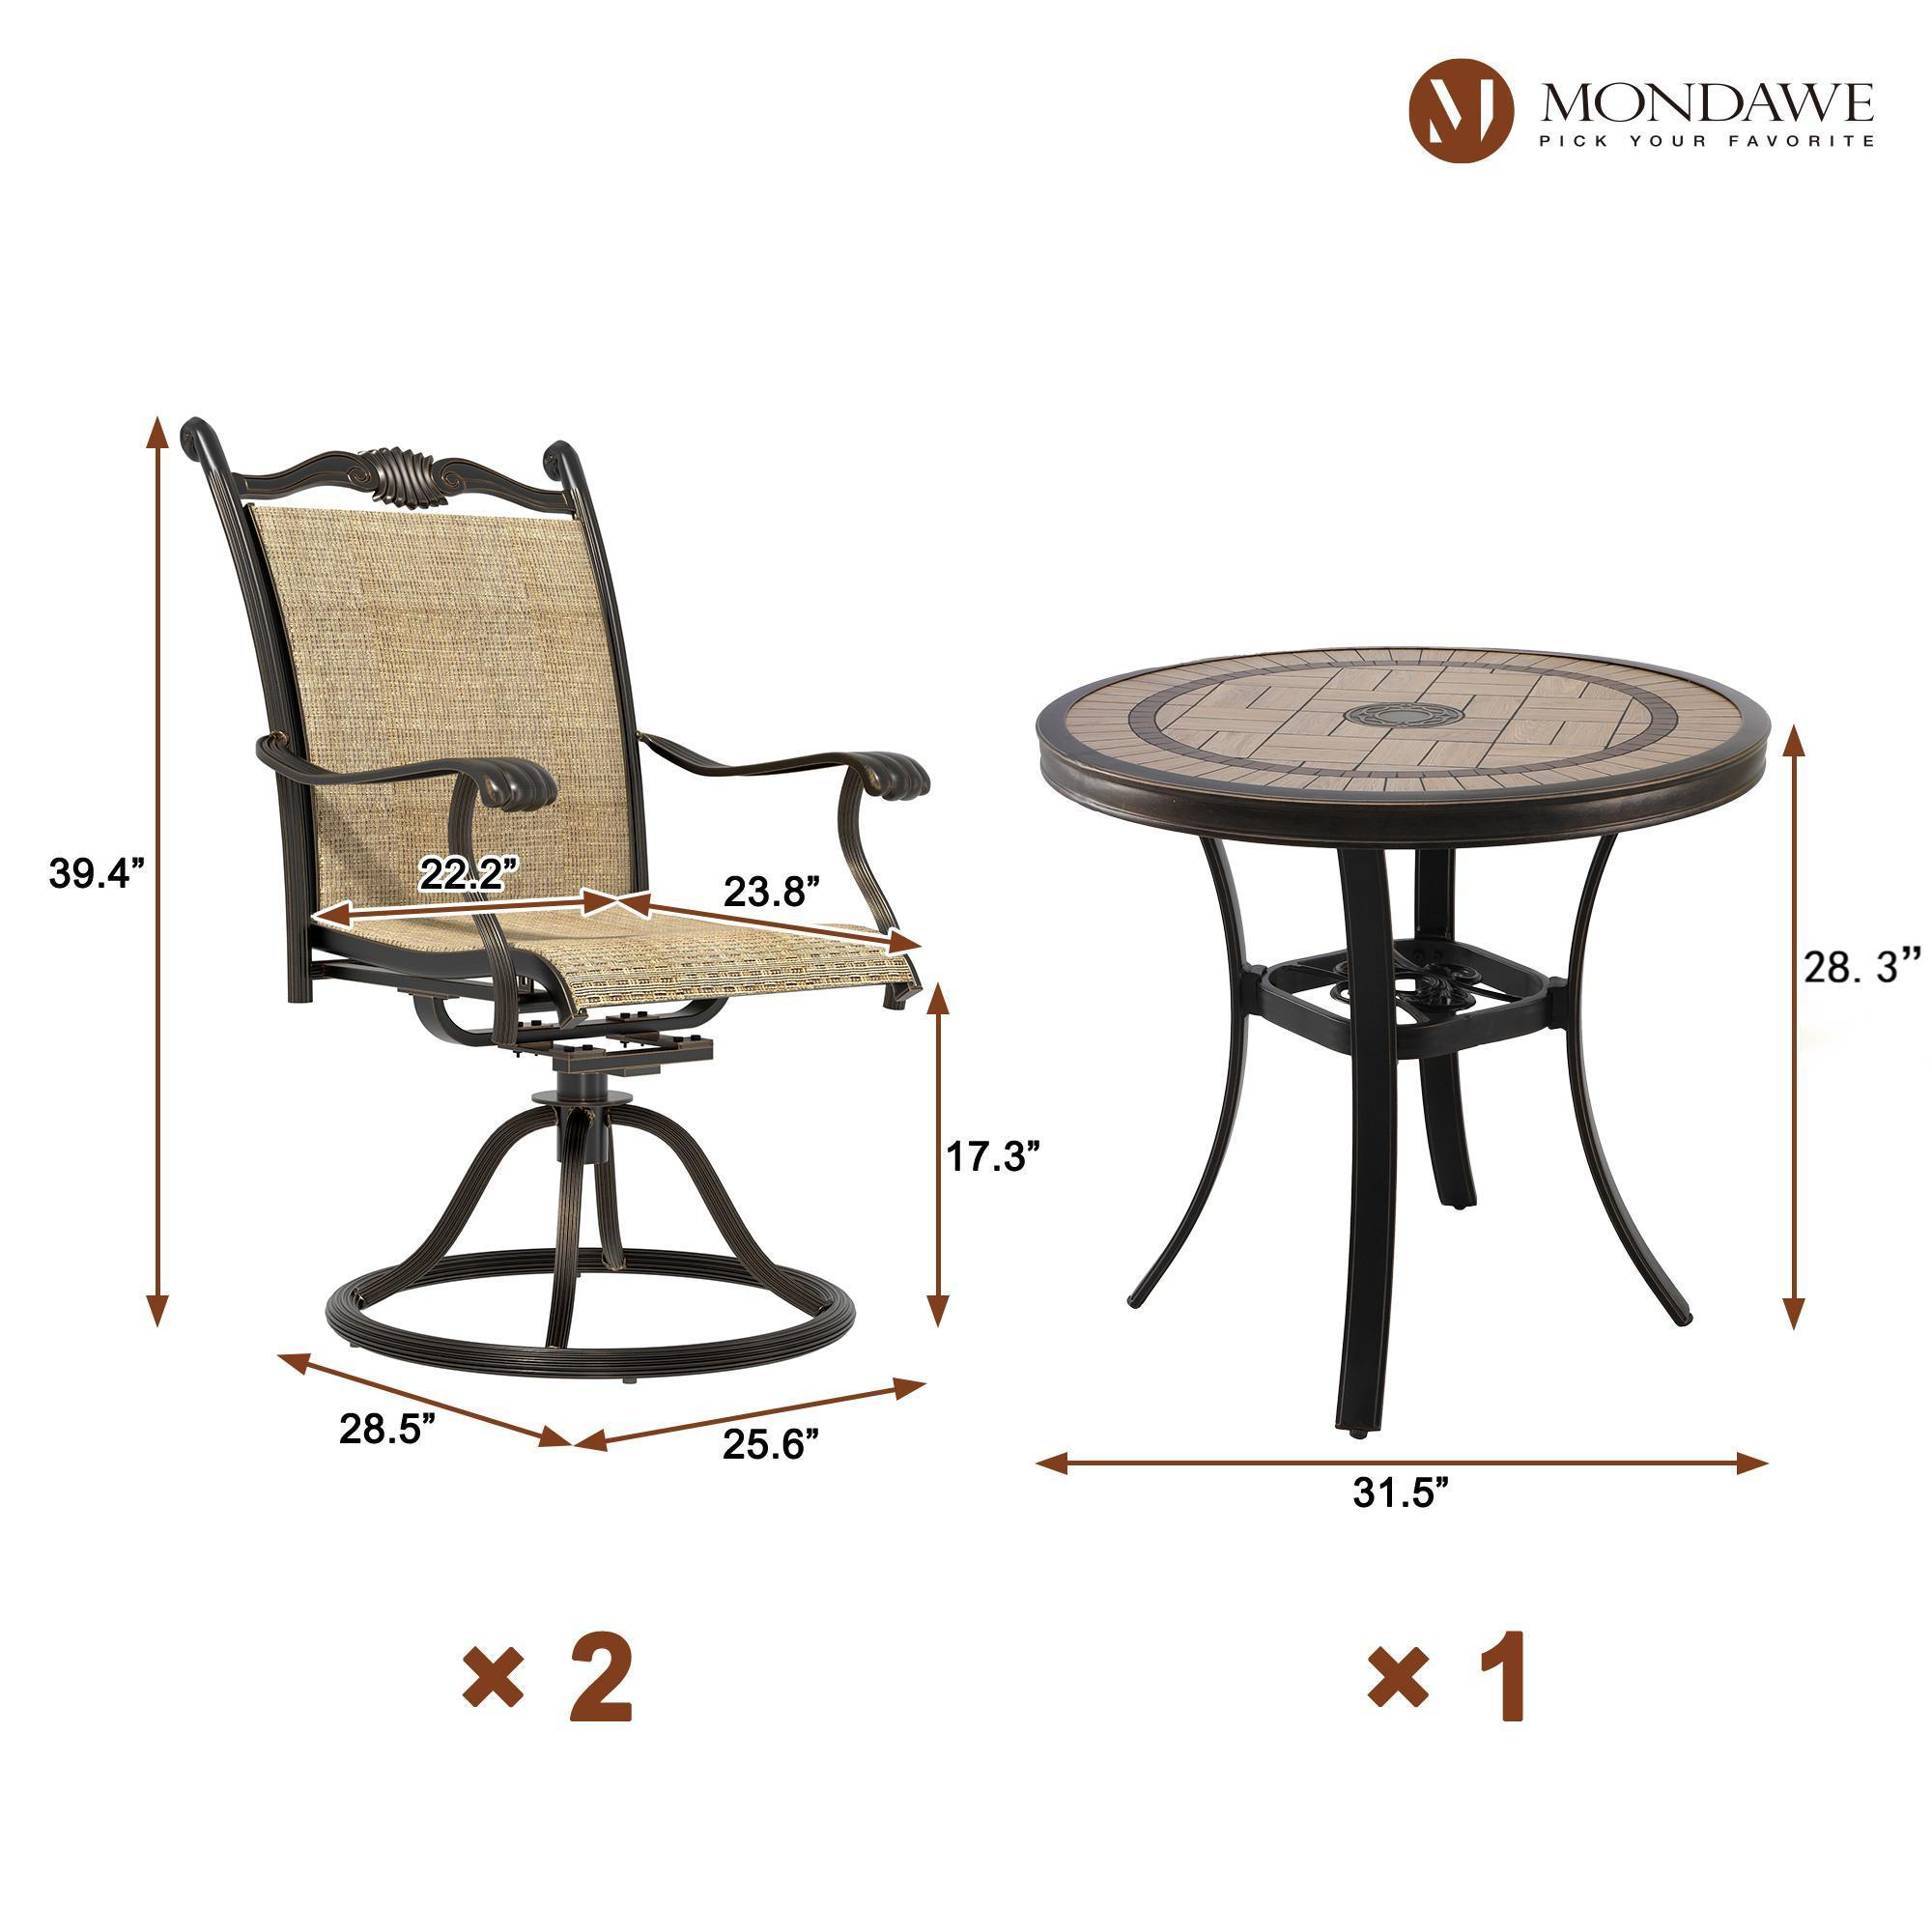 Mondawe 3Pcs Cast Aluminum Dining Set with Round Tile-Top Table and Textilene Swivel Chairs